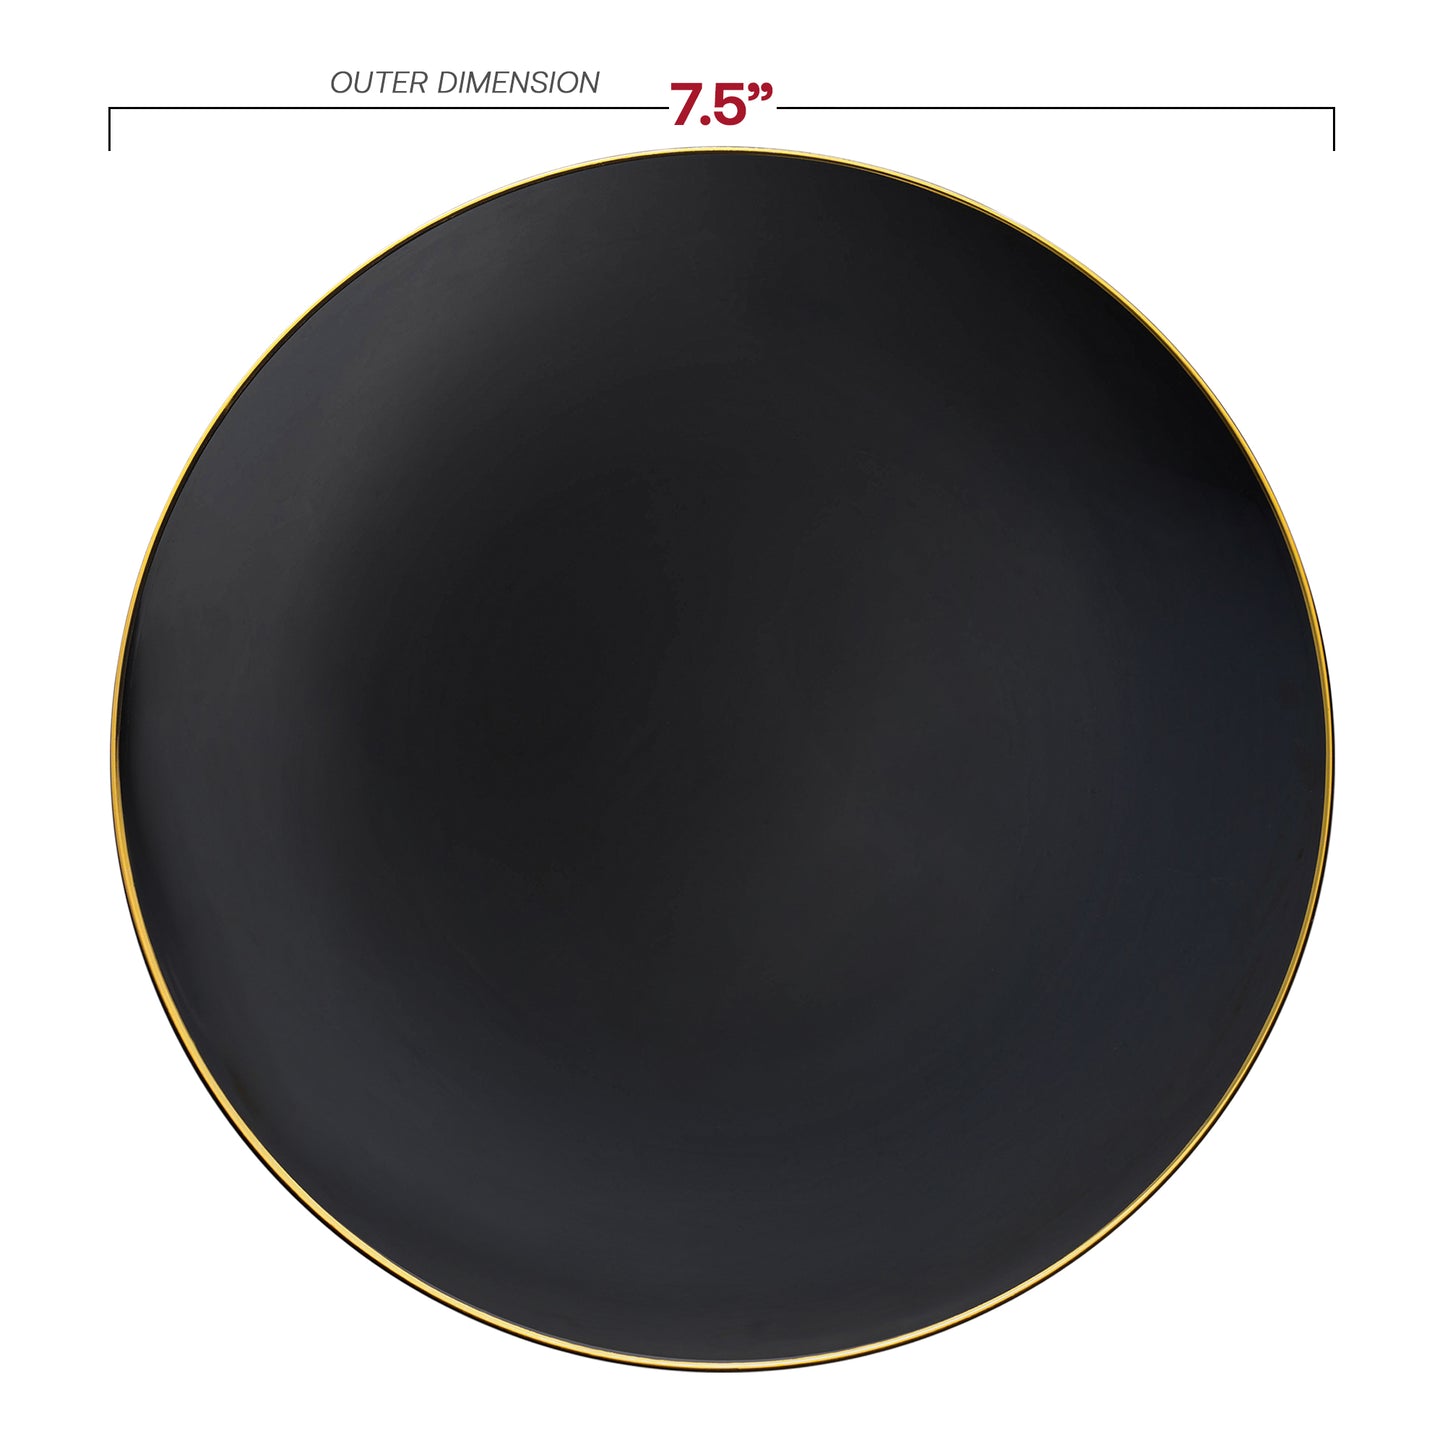 Black with Gold Rim Organic Round Disposable Plastic Appetizer/Salad Plates (7.5") Dimension | The Kaya Collection